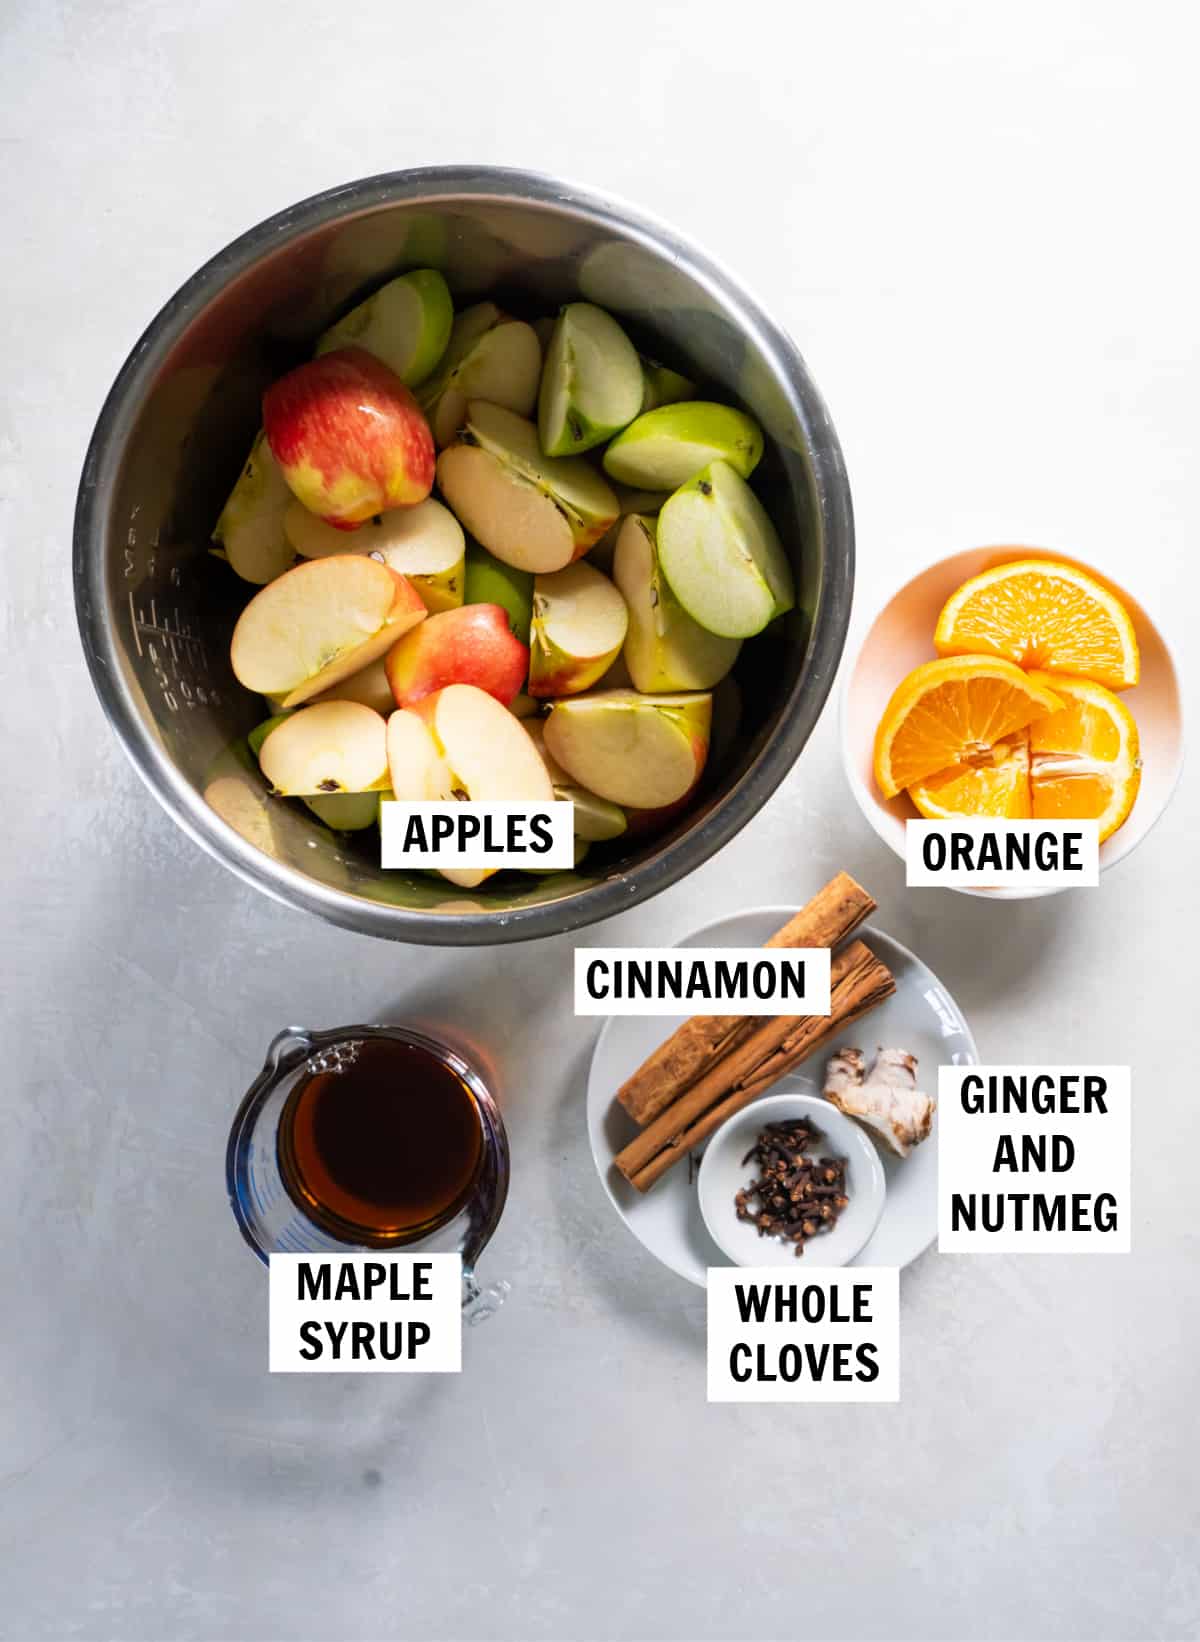 All of the ingredients for the instant pot apple cider on a white countertop.